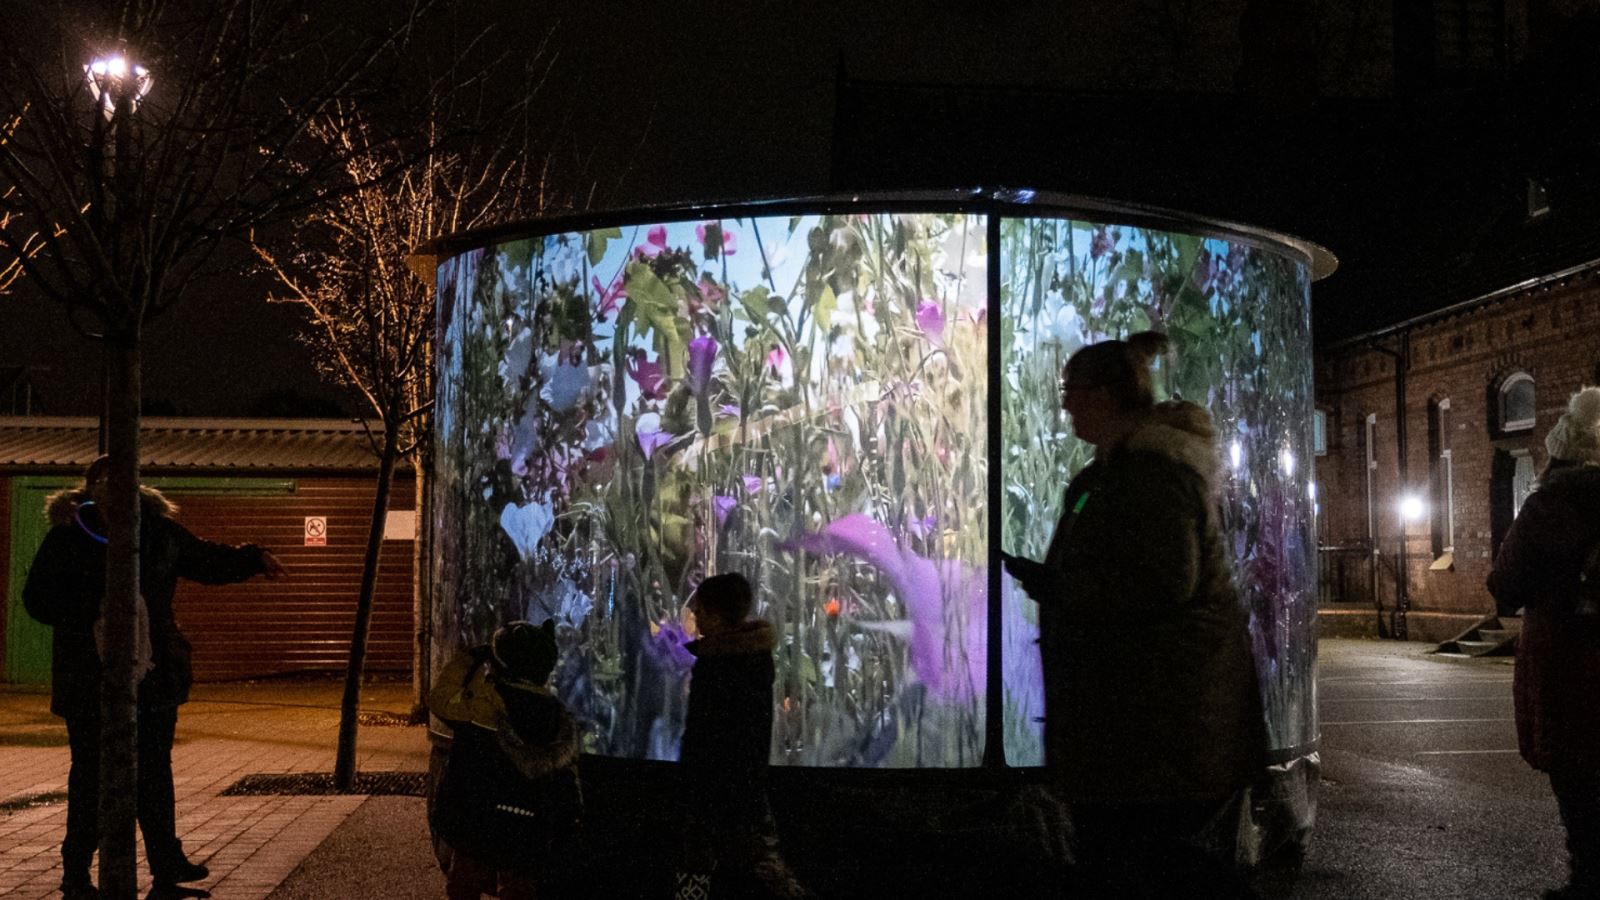 An image of the Night Garden installation